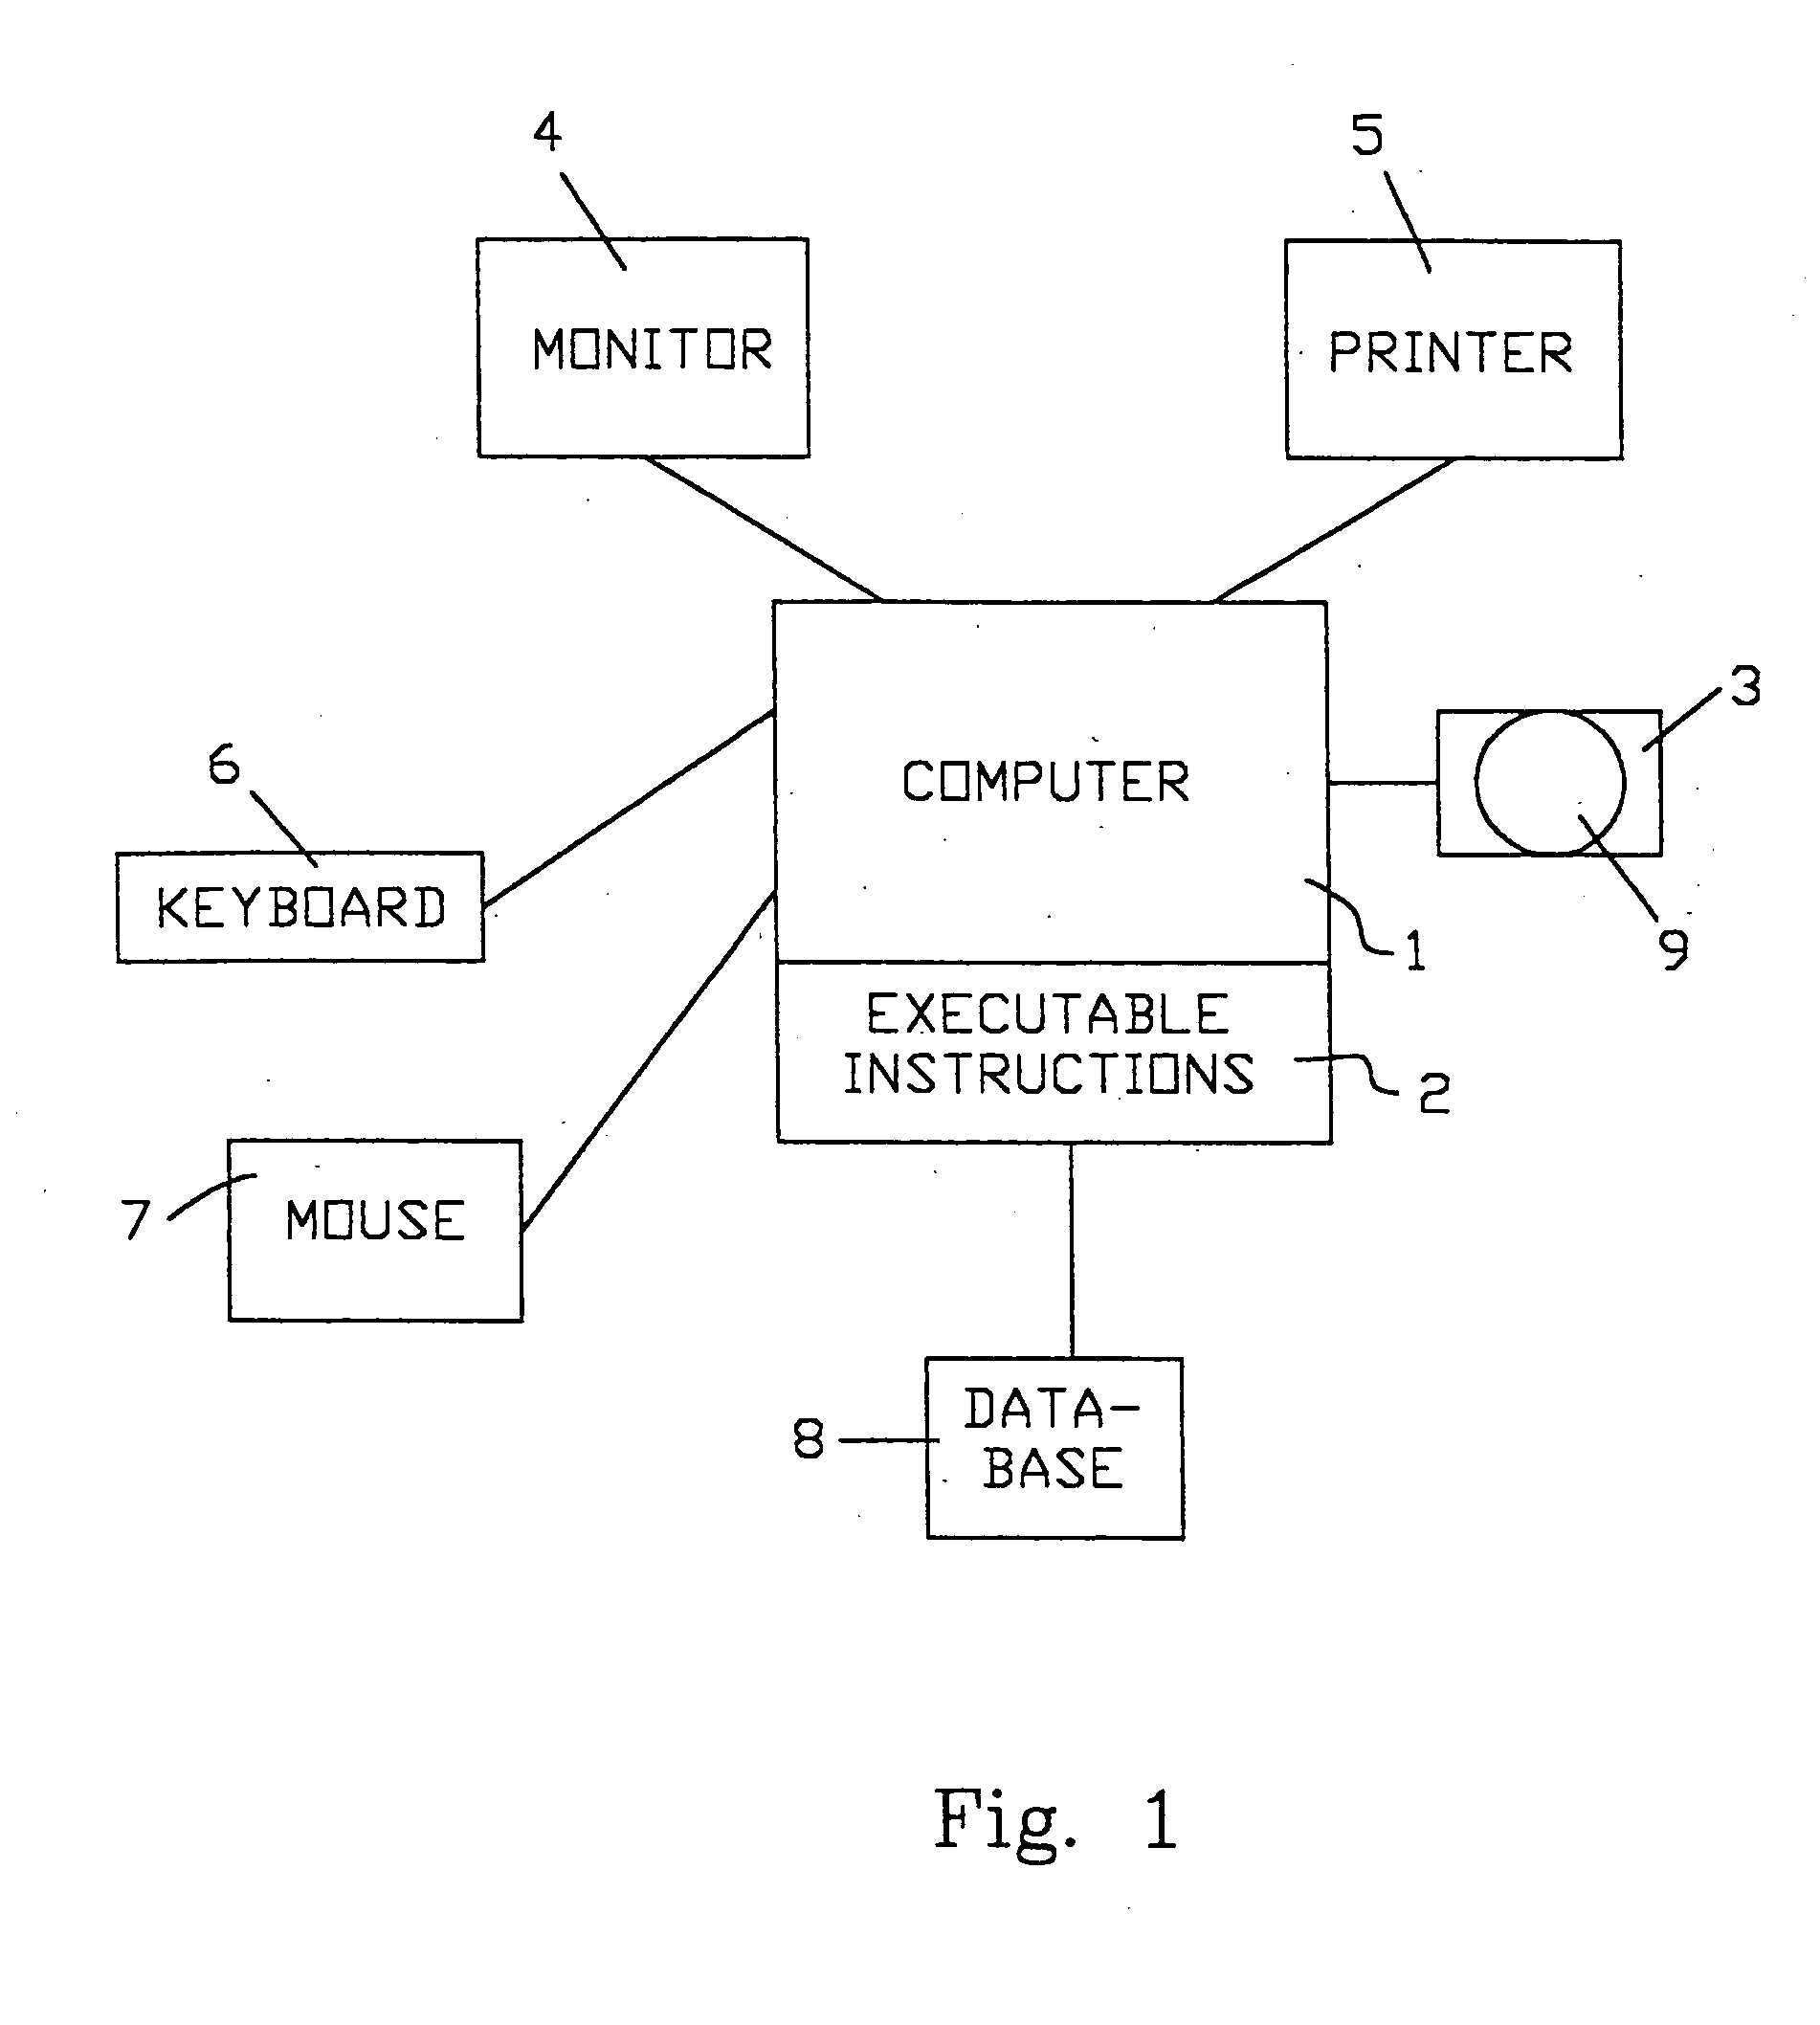 Method and apparatus for significance testing and confidence interval construction based on user-specified distributions